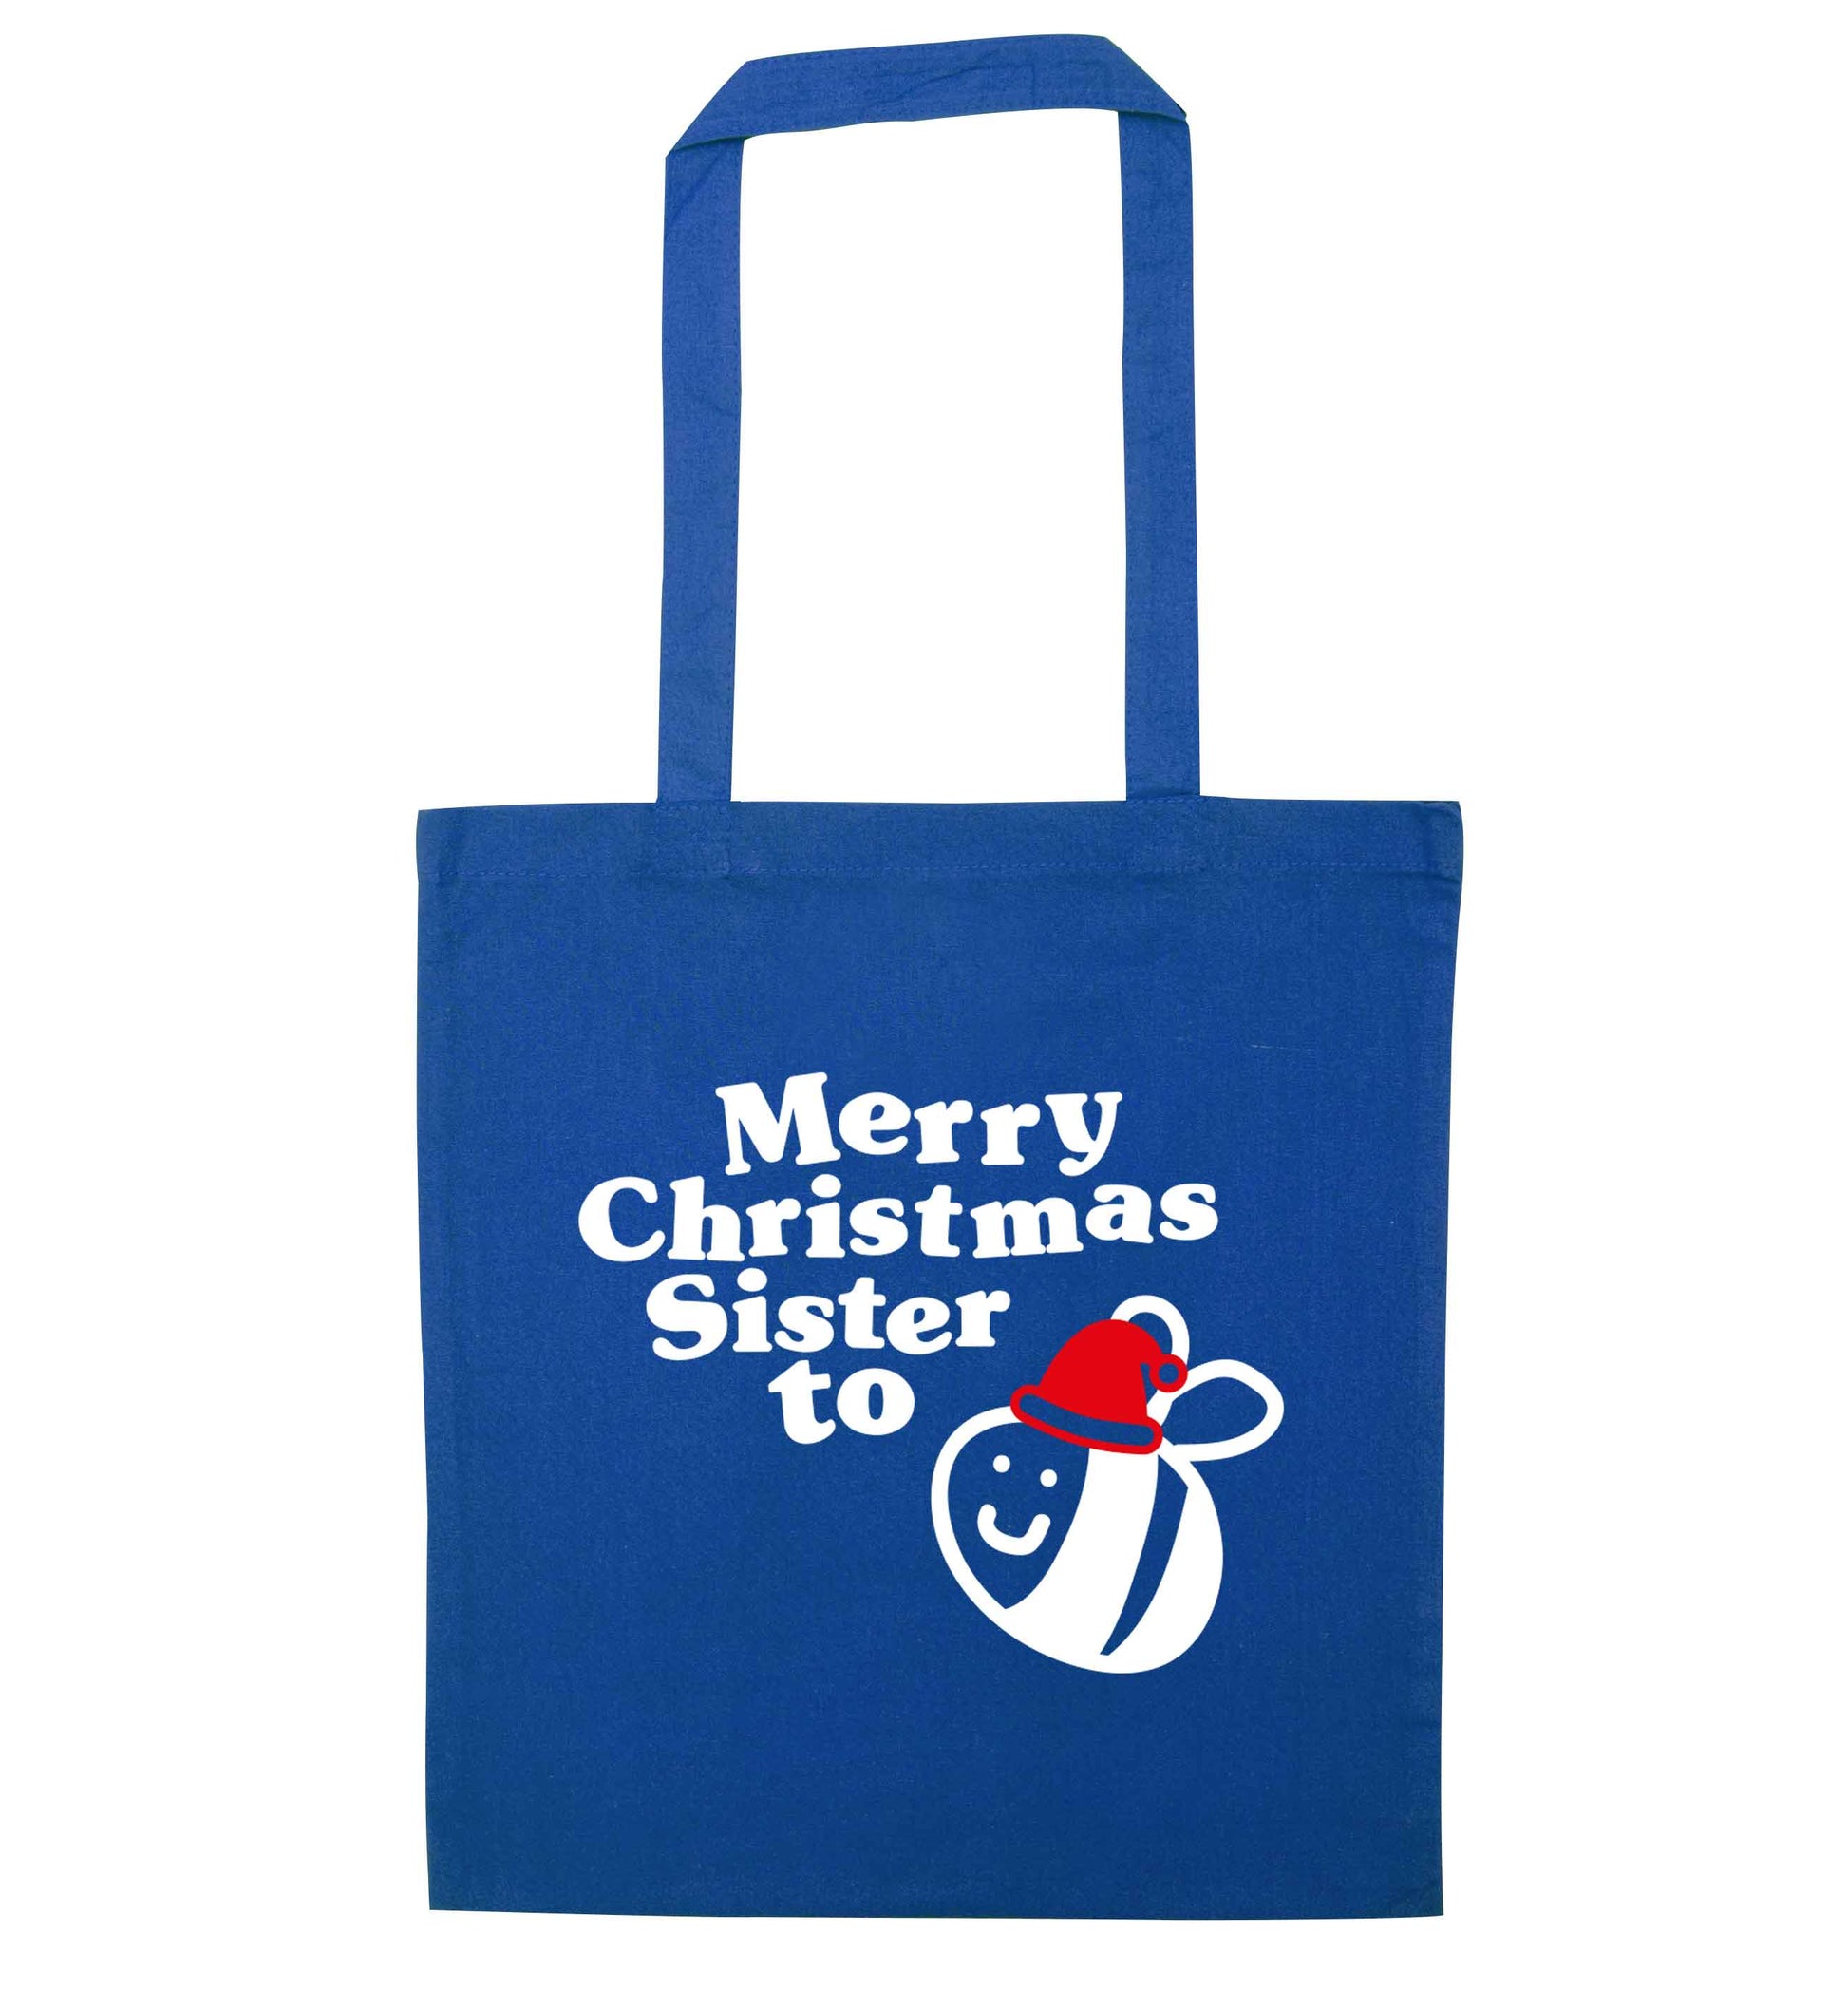 Merry Christmas sister to be blue tote bag